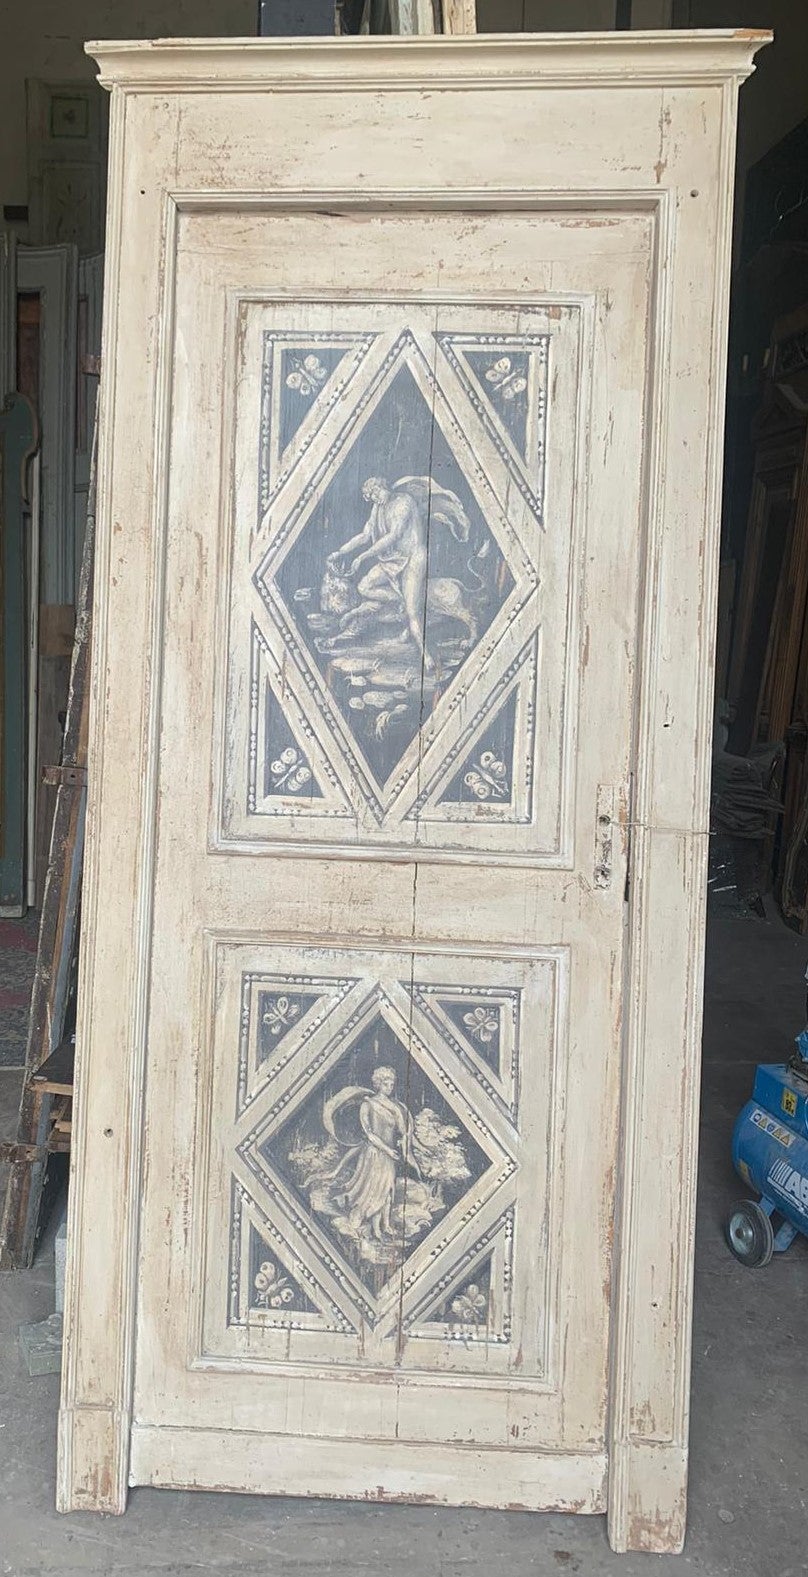 Antique interior door, richly painted with classical motifs, with original frame, built and hand painted in the 18th century, for an important building in Turin, Italy.
Beautiful on both sides, painted, opens to push left, maintains original